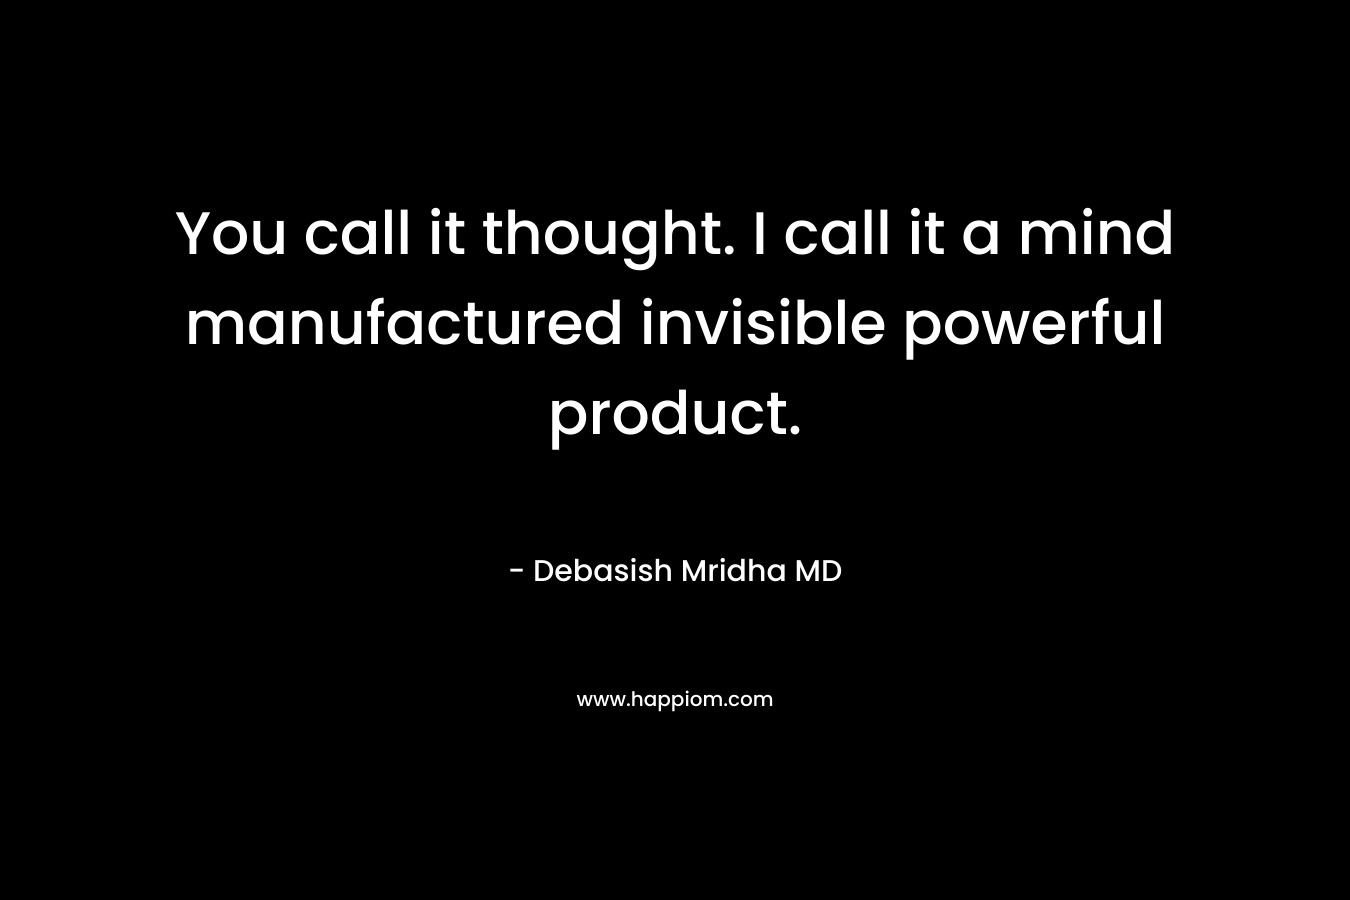 You call it thought. I call it a mind manufactured invisible powerful product. – Debasish Mridha MD